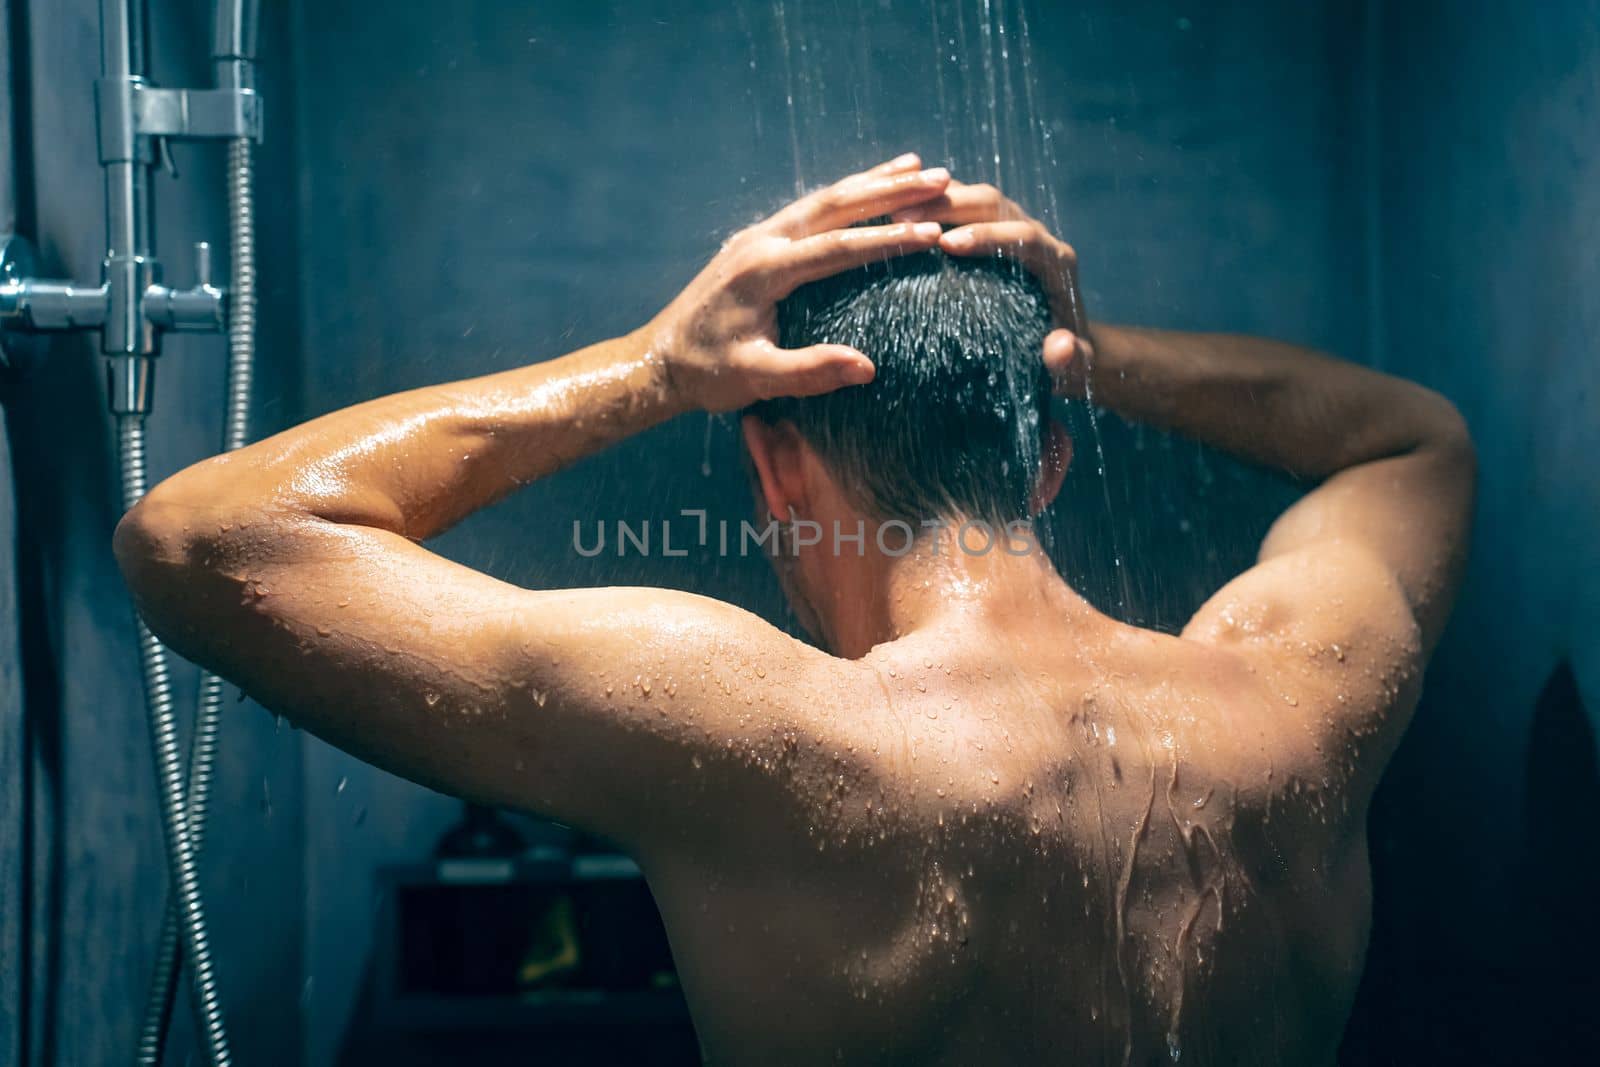 Man taking shower washing hair with shampoo product under water falling from luxury rain shower head by PaulCarr